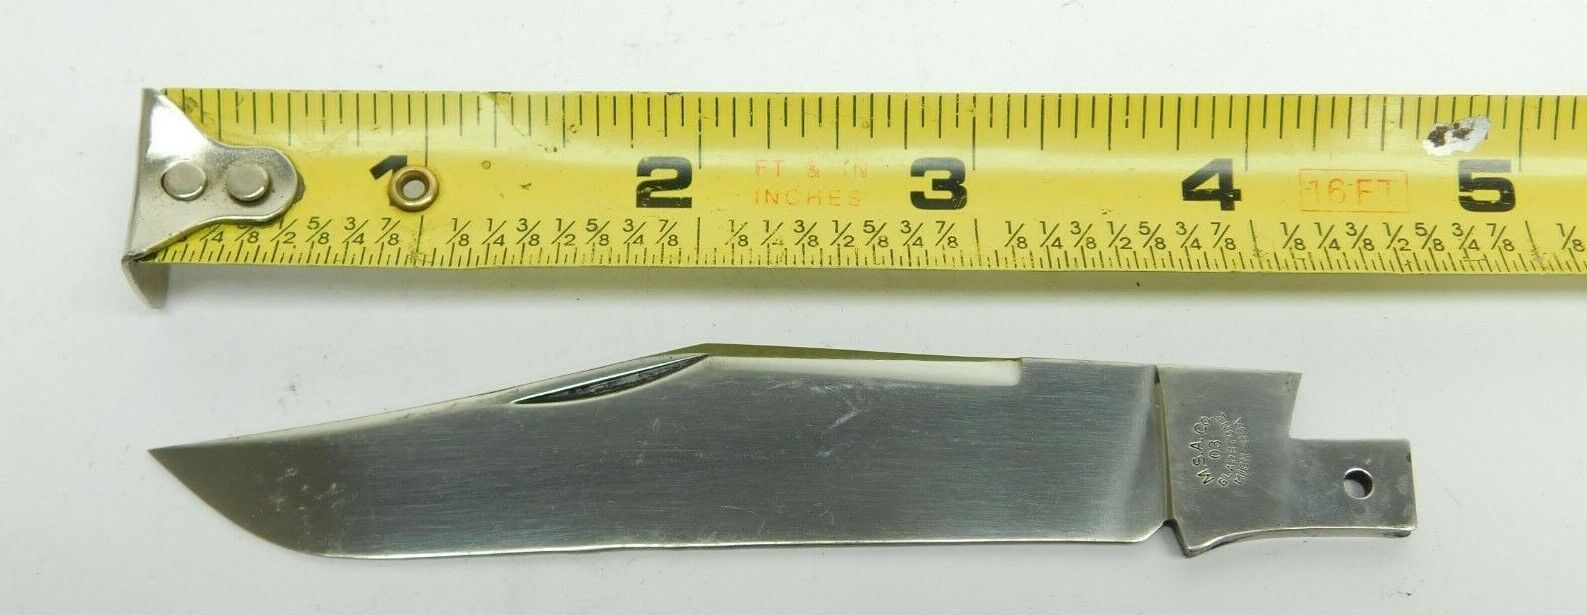 REPLACEMENT CLIP BLADE For #71 MARBLES MSA FOLDING DADDY BARLOW KNIFE USA QC